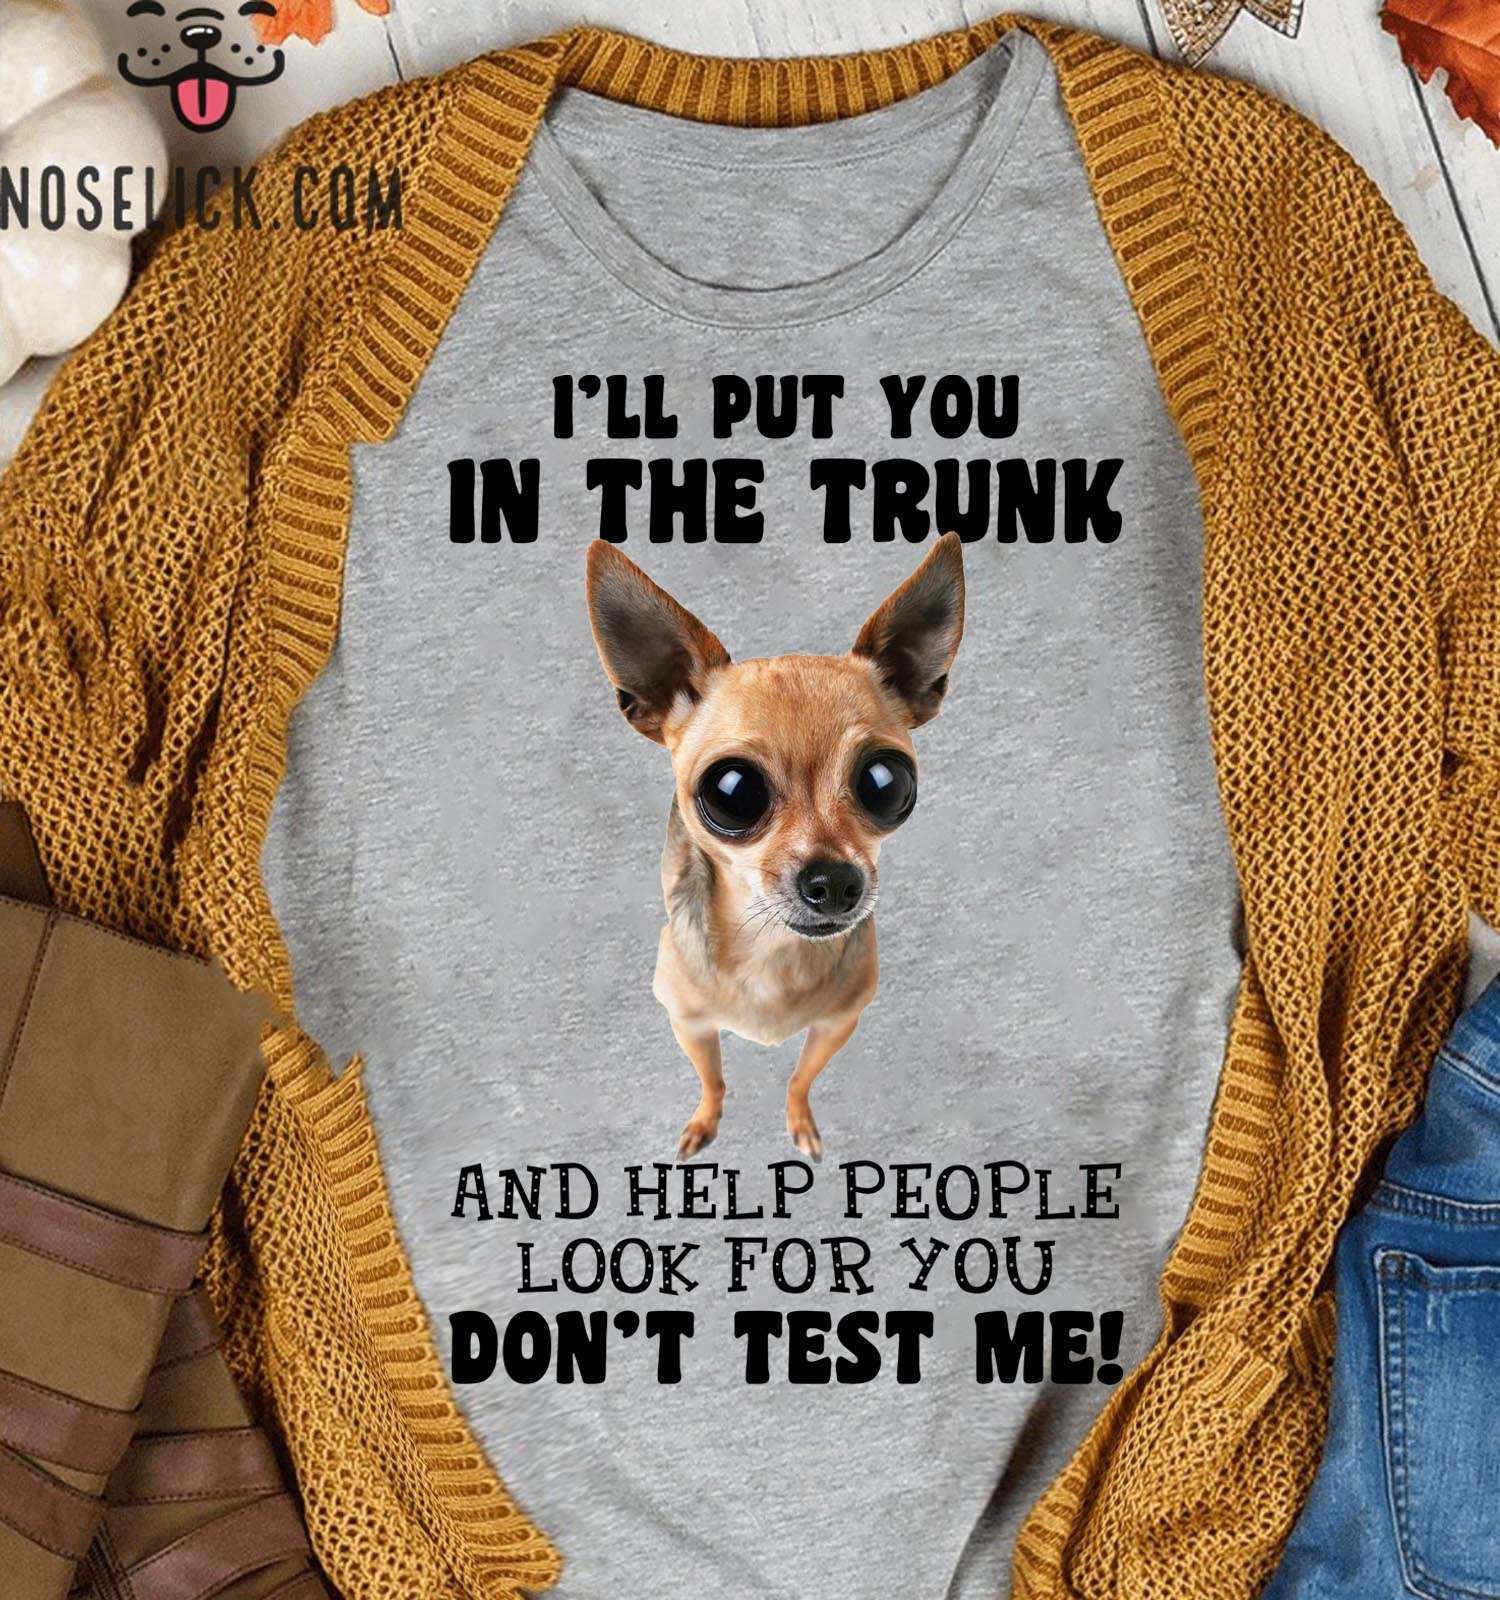 I'll put you in the trunk and help people look for you - Big eye Chihuahua dog, Chihuahua dog lover